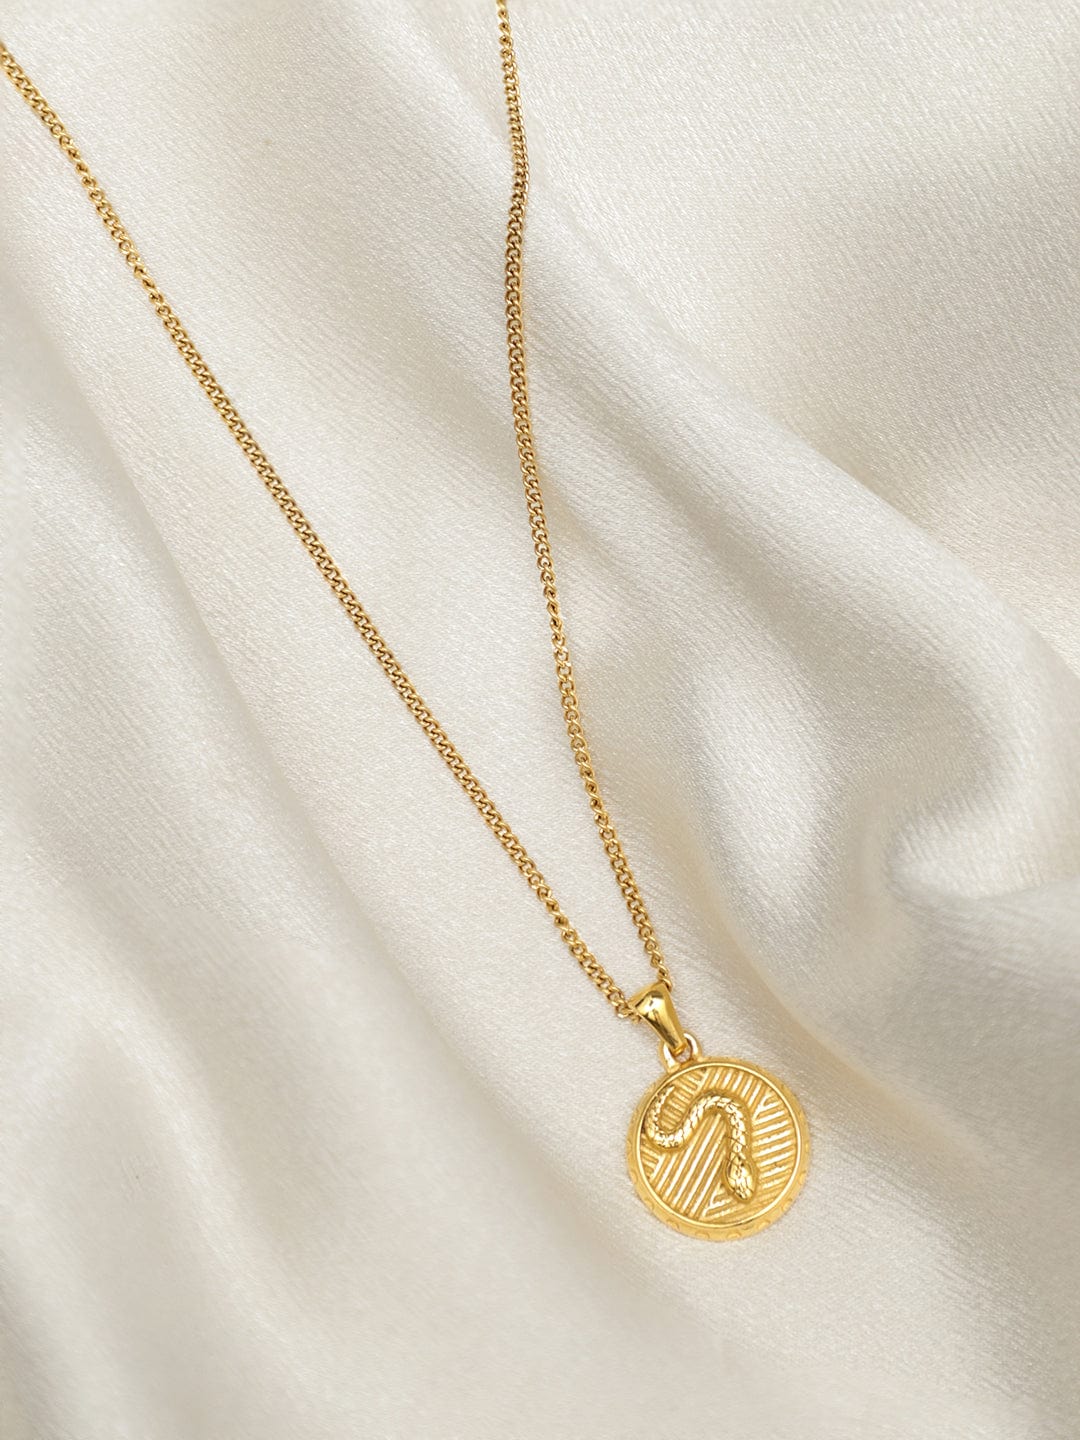 Rubans Voguish 18K Gold Plated Stainless Steel Waterproof Chin With Circle Embossed Pendant. Necklaces, Chains & necklace